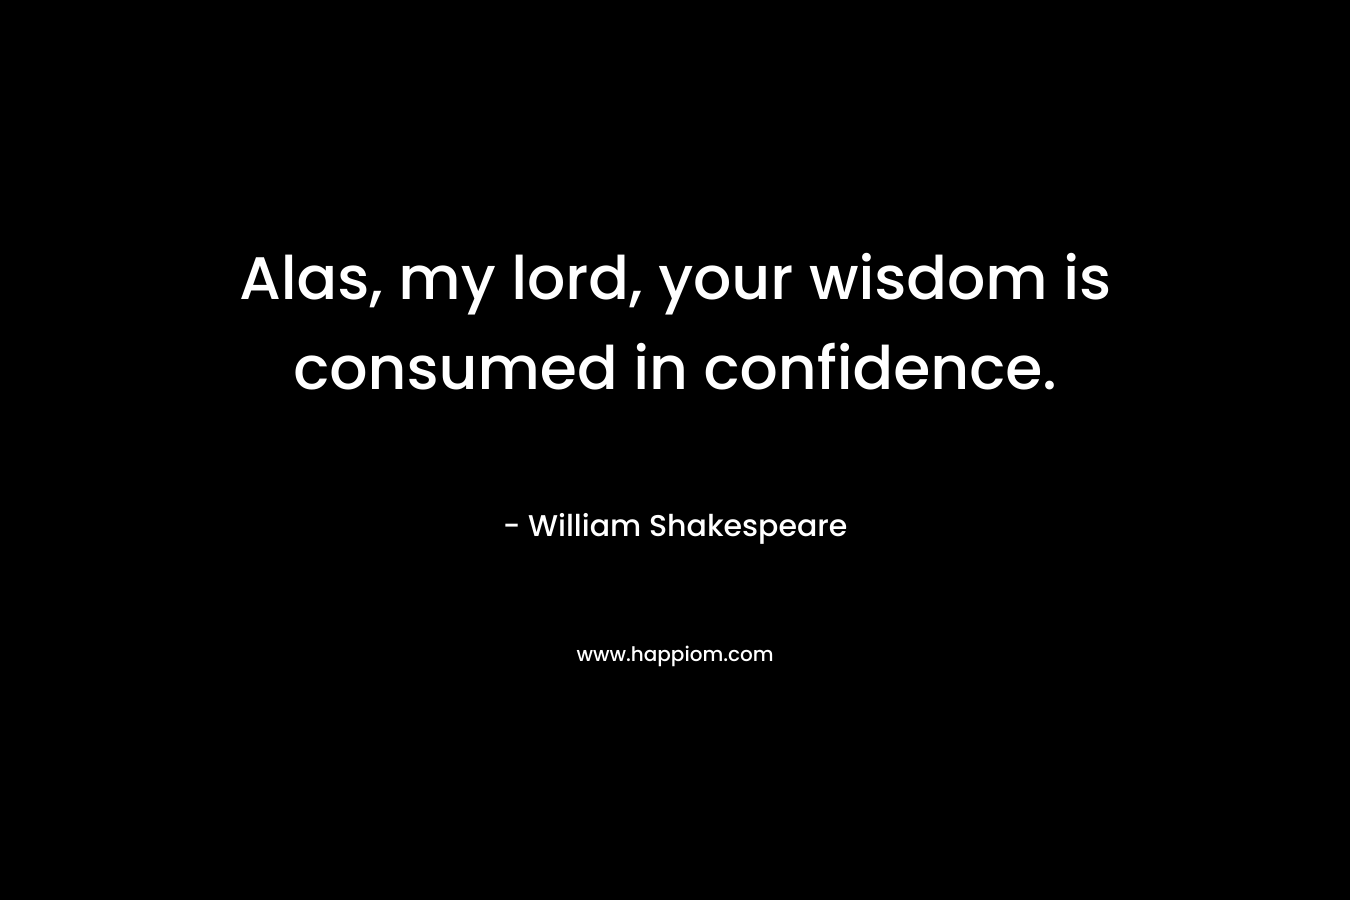 Alas, my lord, your wisdom is consumed in confidence.